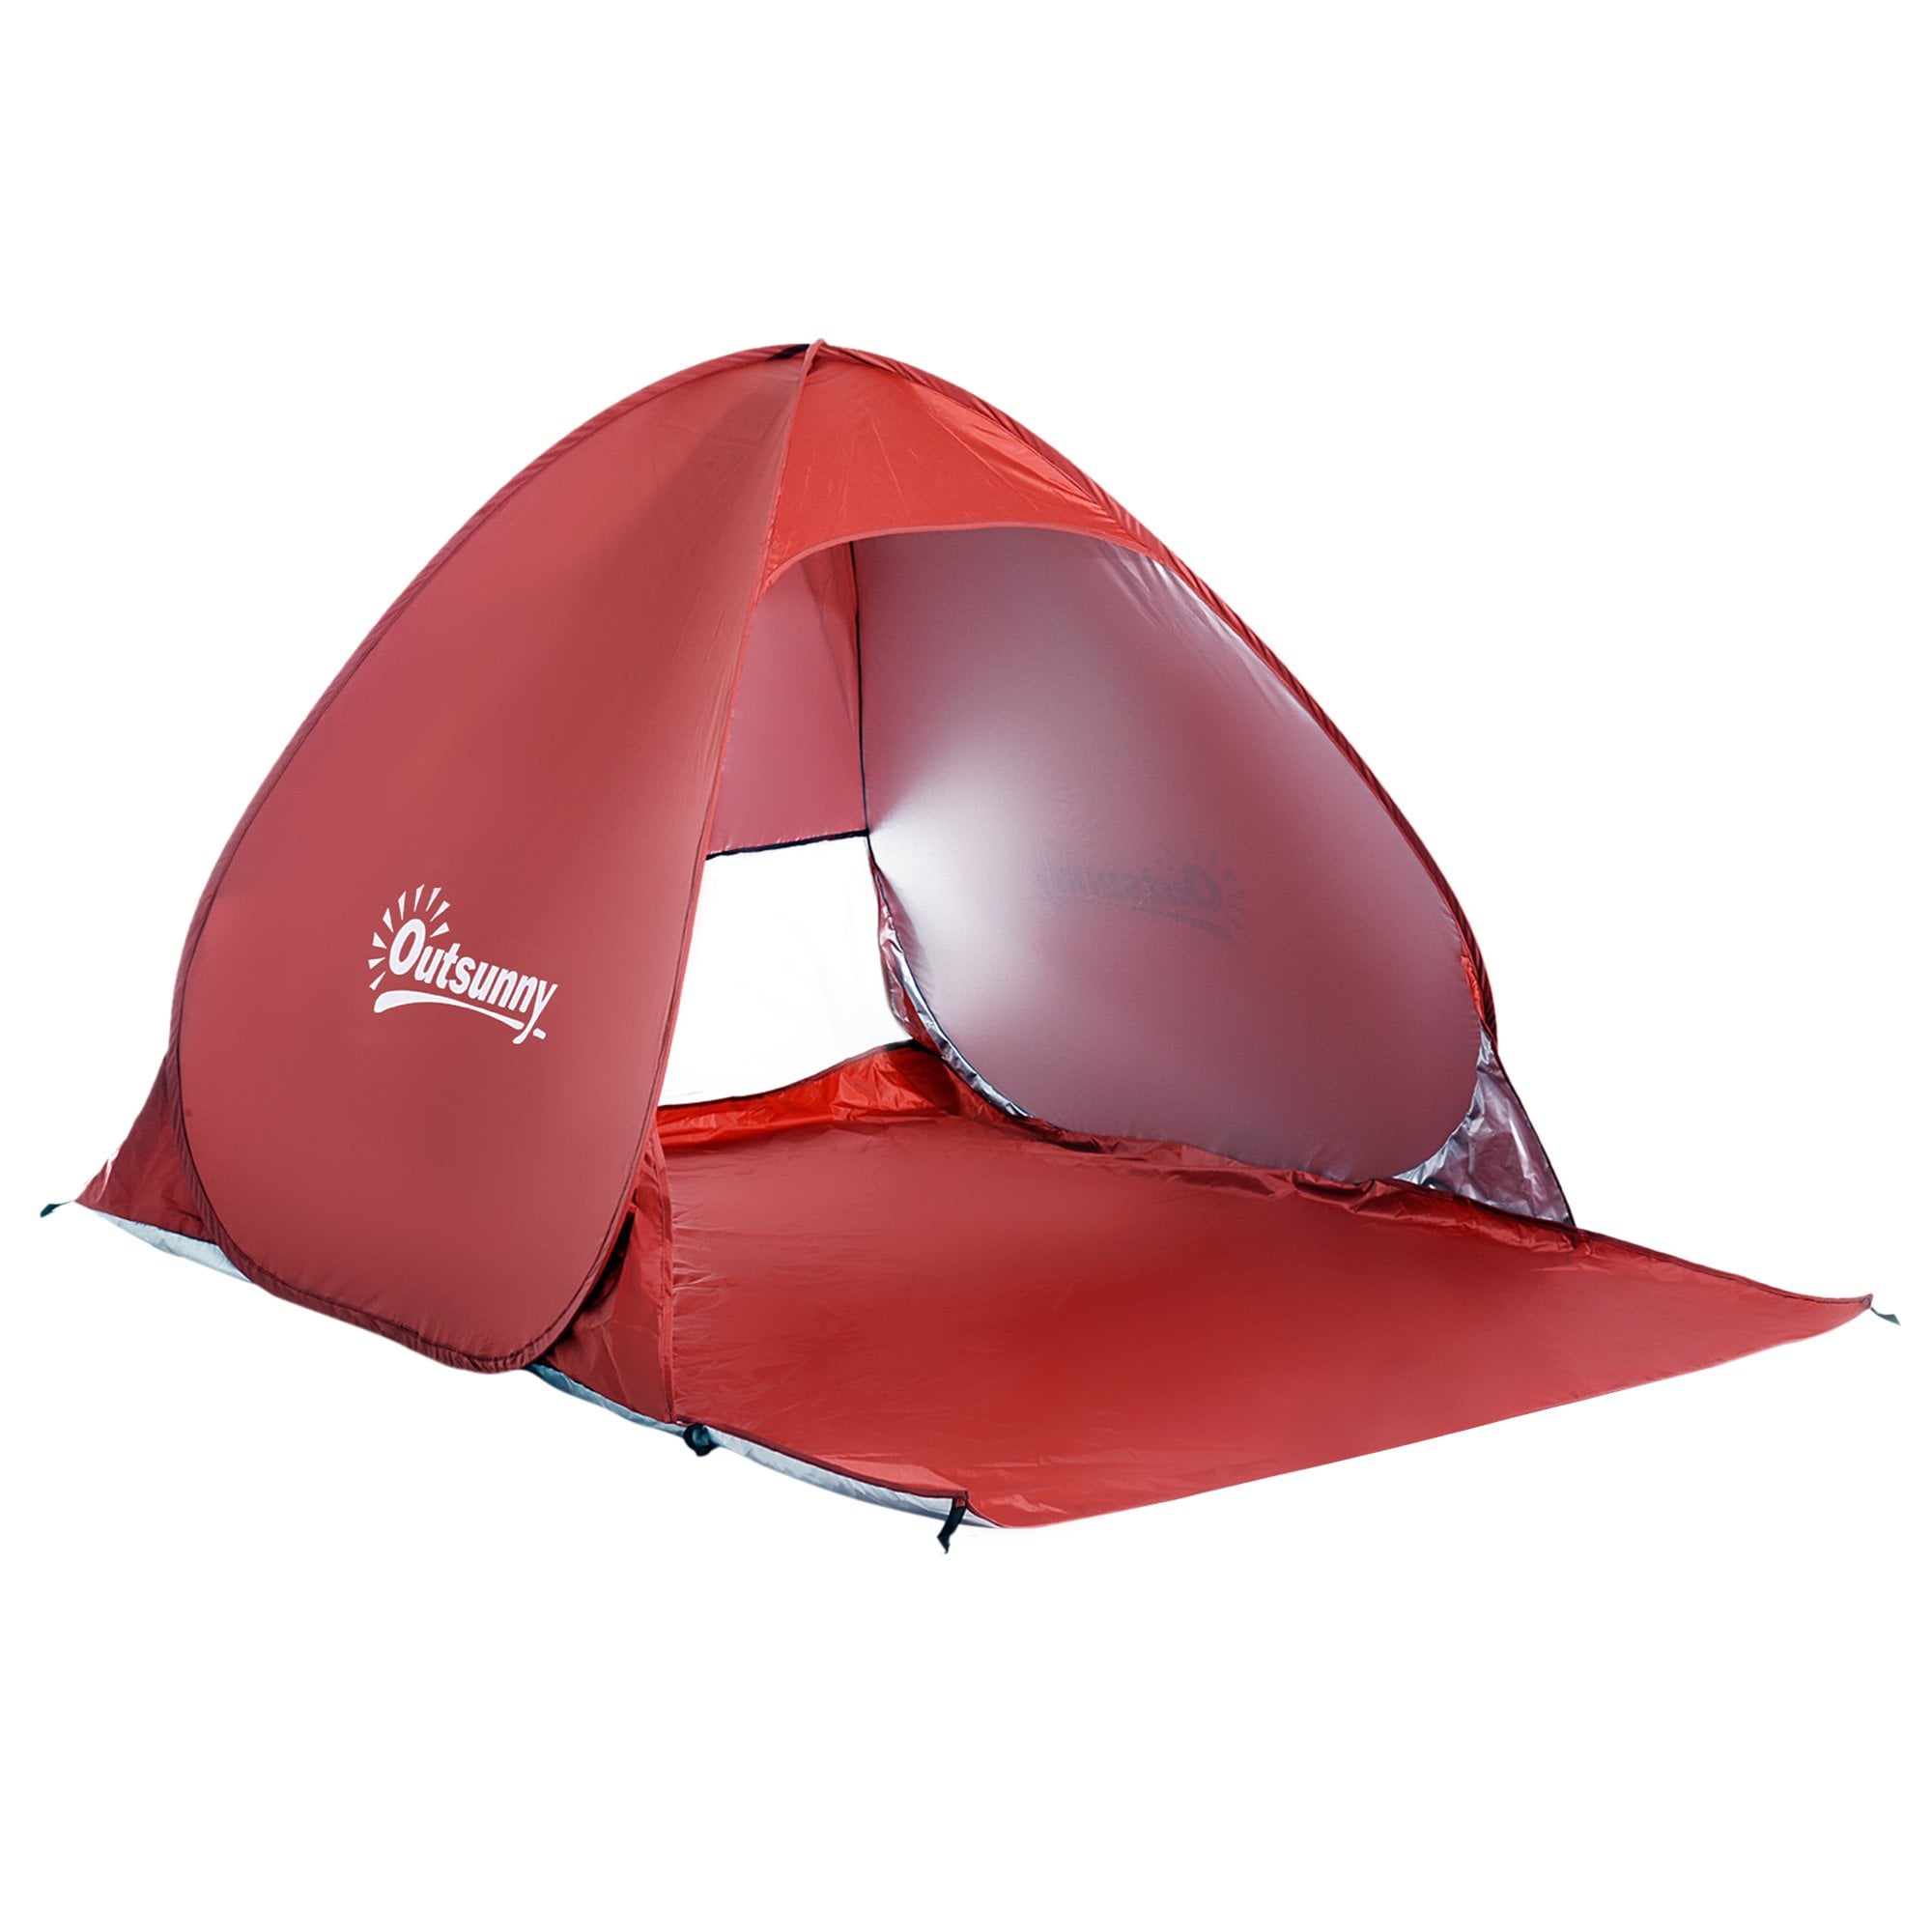 Outsunny Pop-up Portable Beach Tent - Red  | TJ Hughes